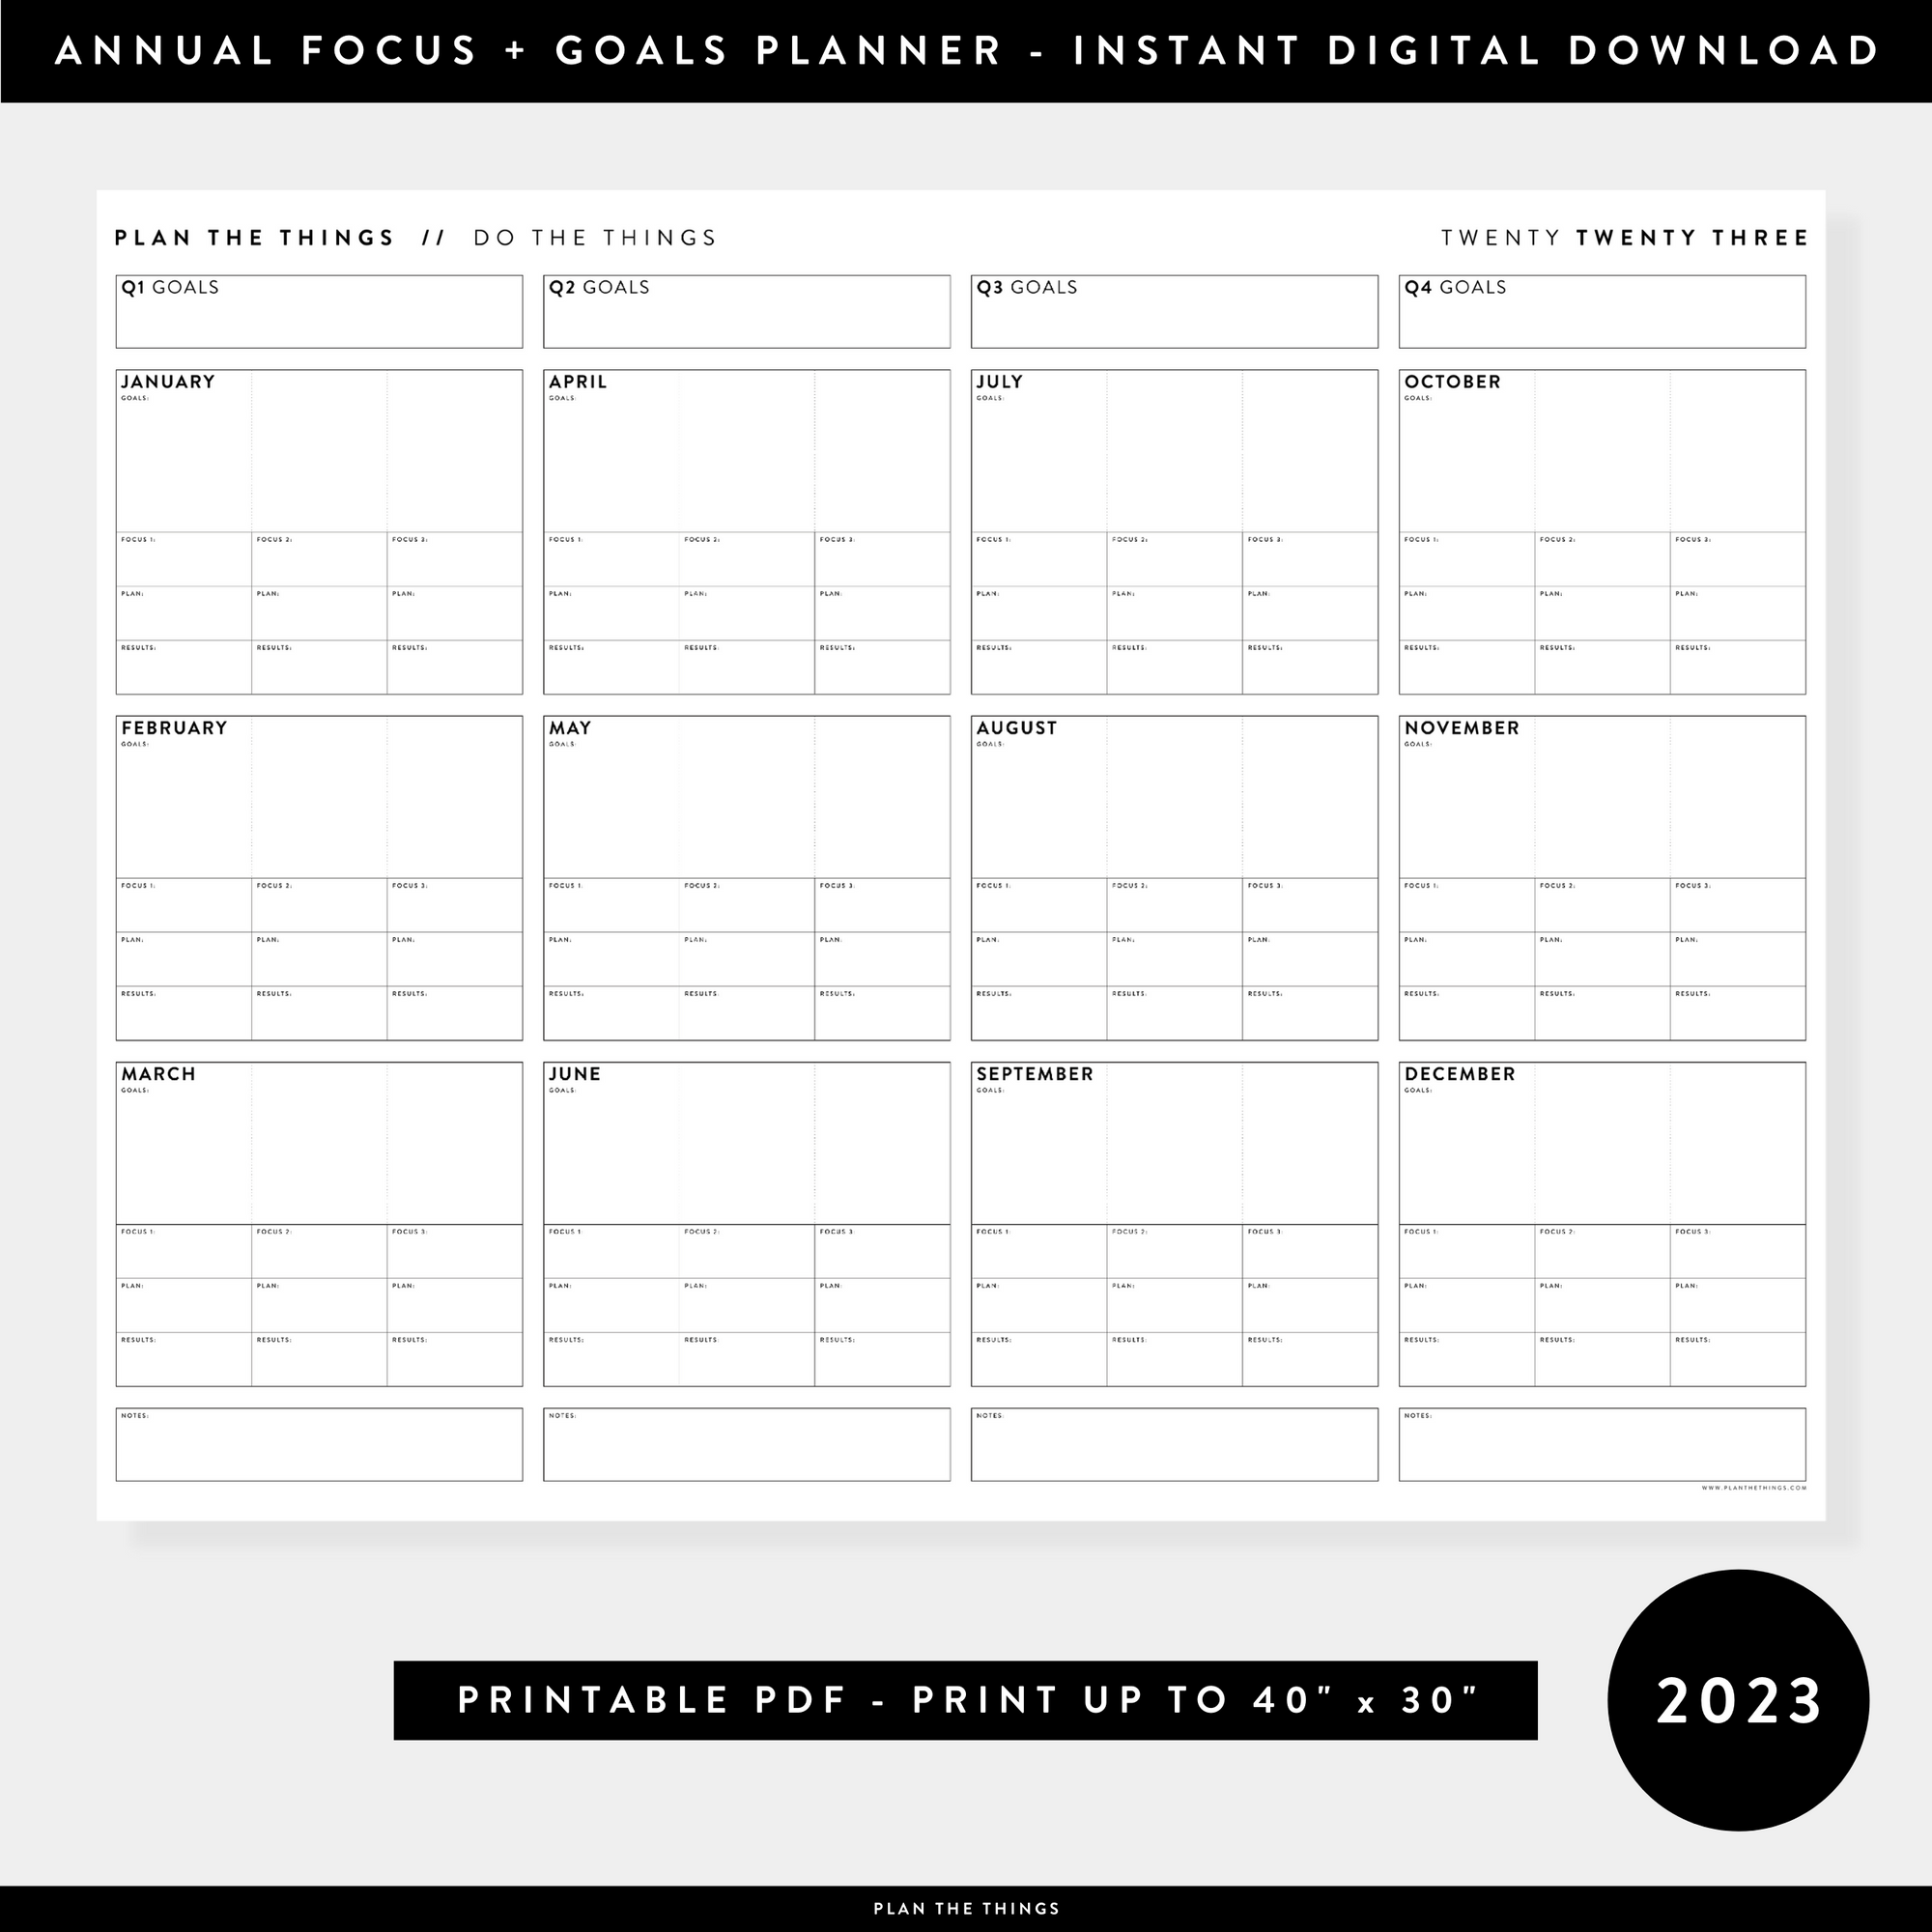 printable-2023-focus-and-goals-annual-wall-planner-instant-download-plan-the-things